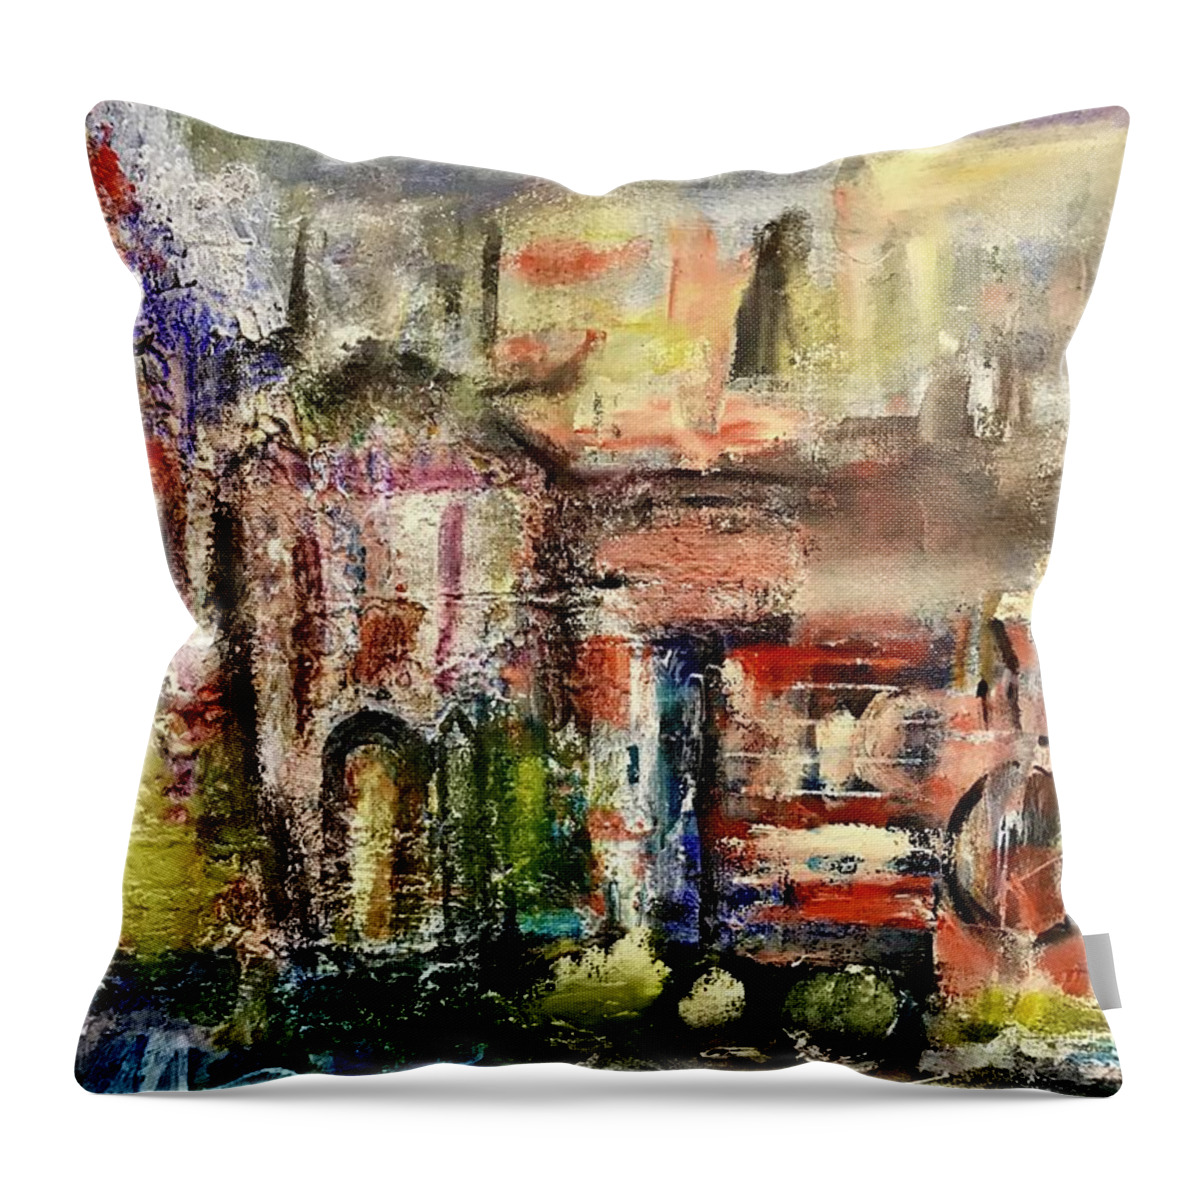 Church Throw Pillow featuring the painting Life's Textures by Tommy McDonell